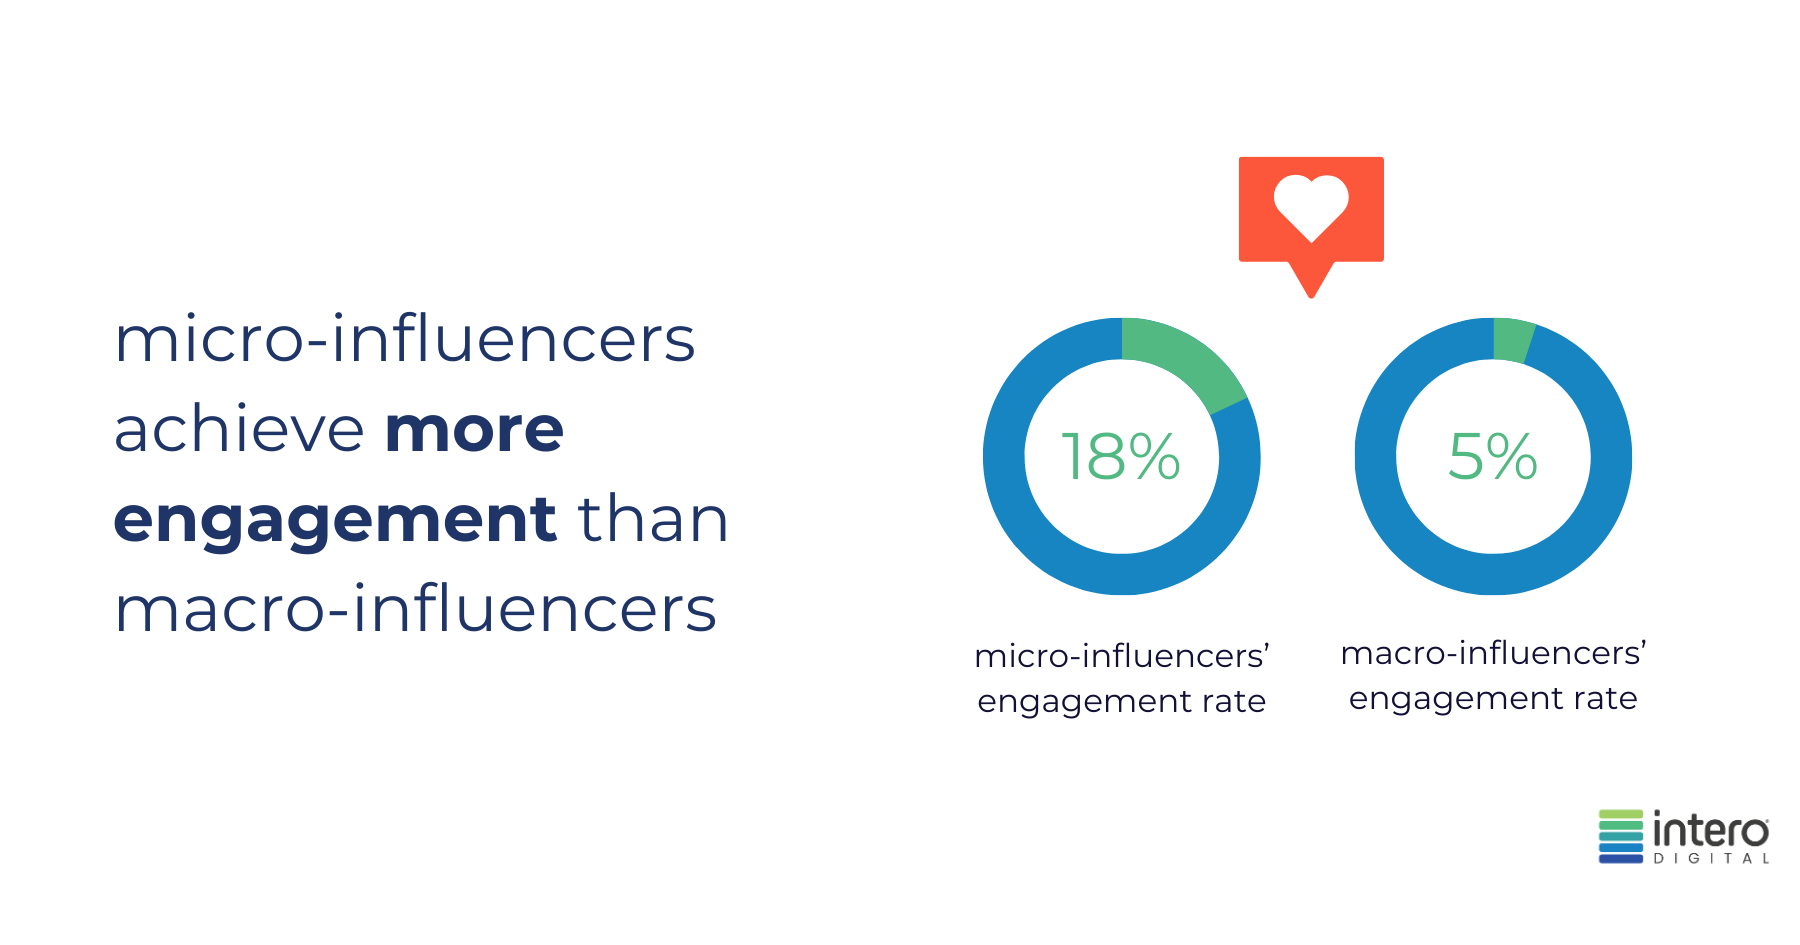 micro-influencers achieve more engagement than macro-influencers. 18% micro-influencers' engagement rate. 5% macro-influencers' engagement rate.